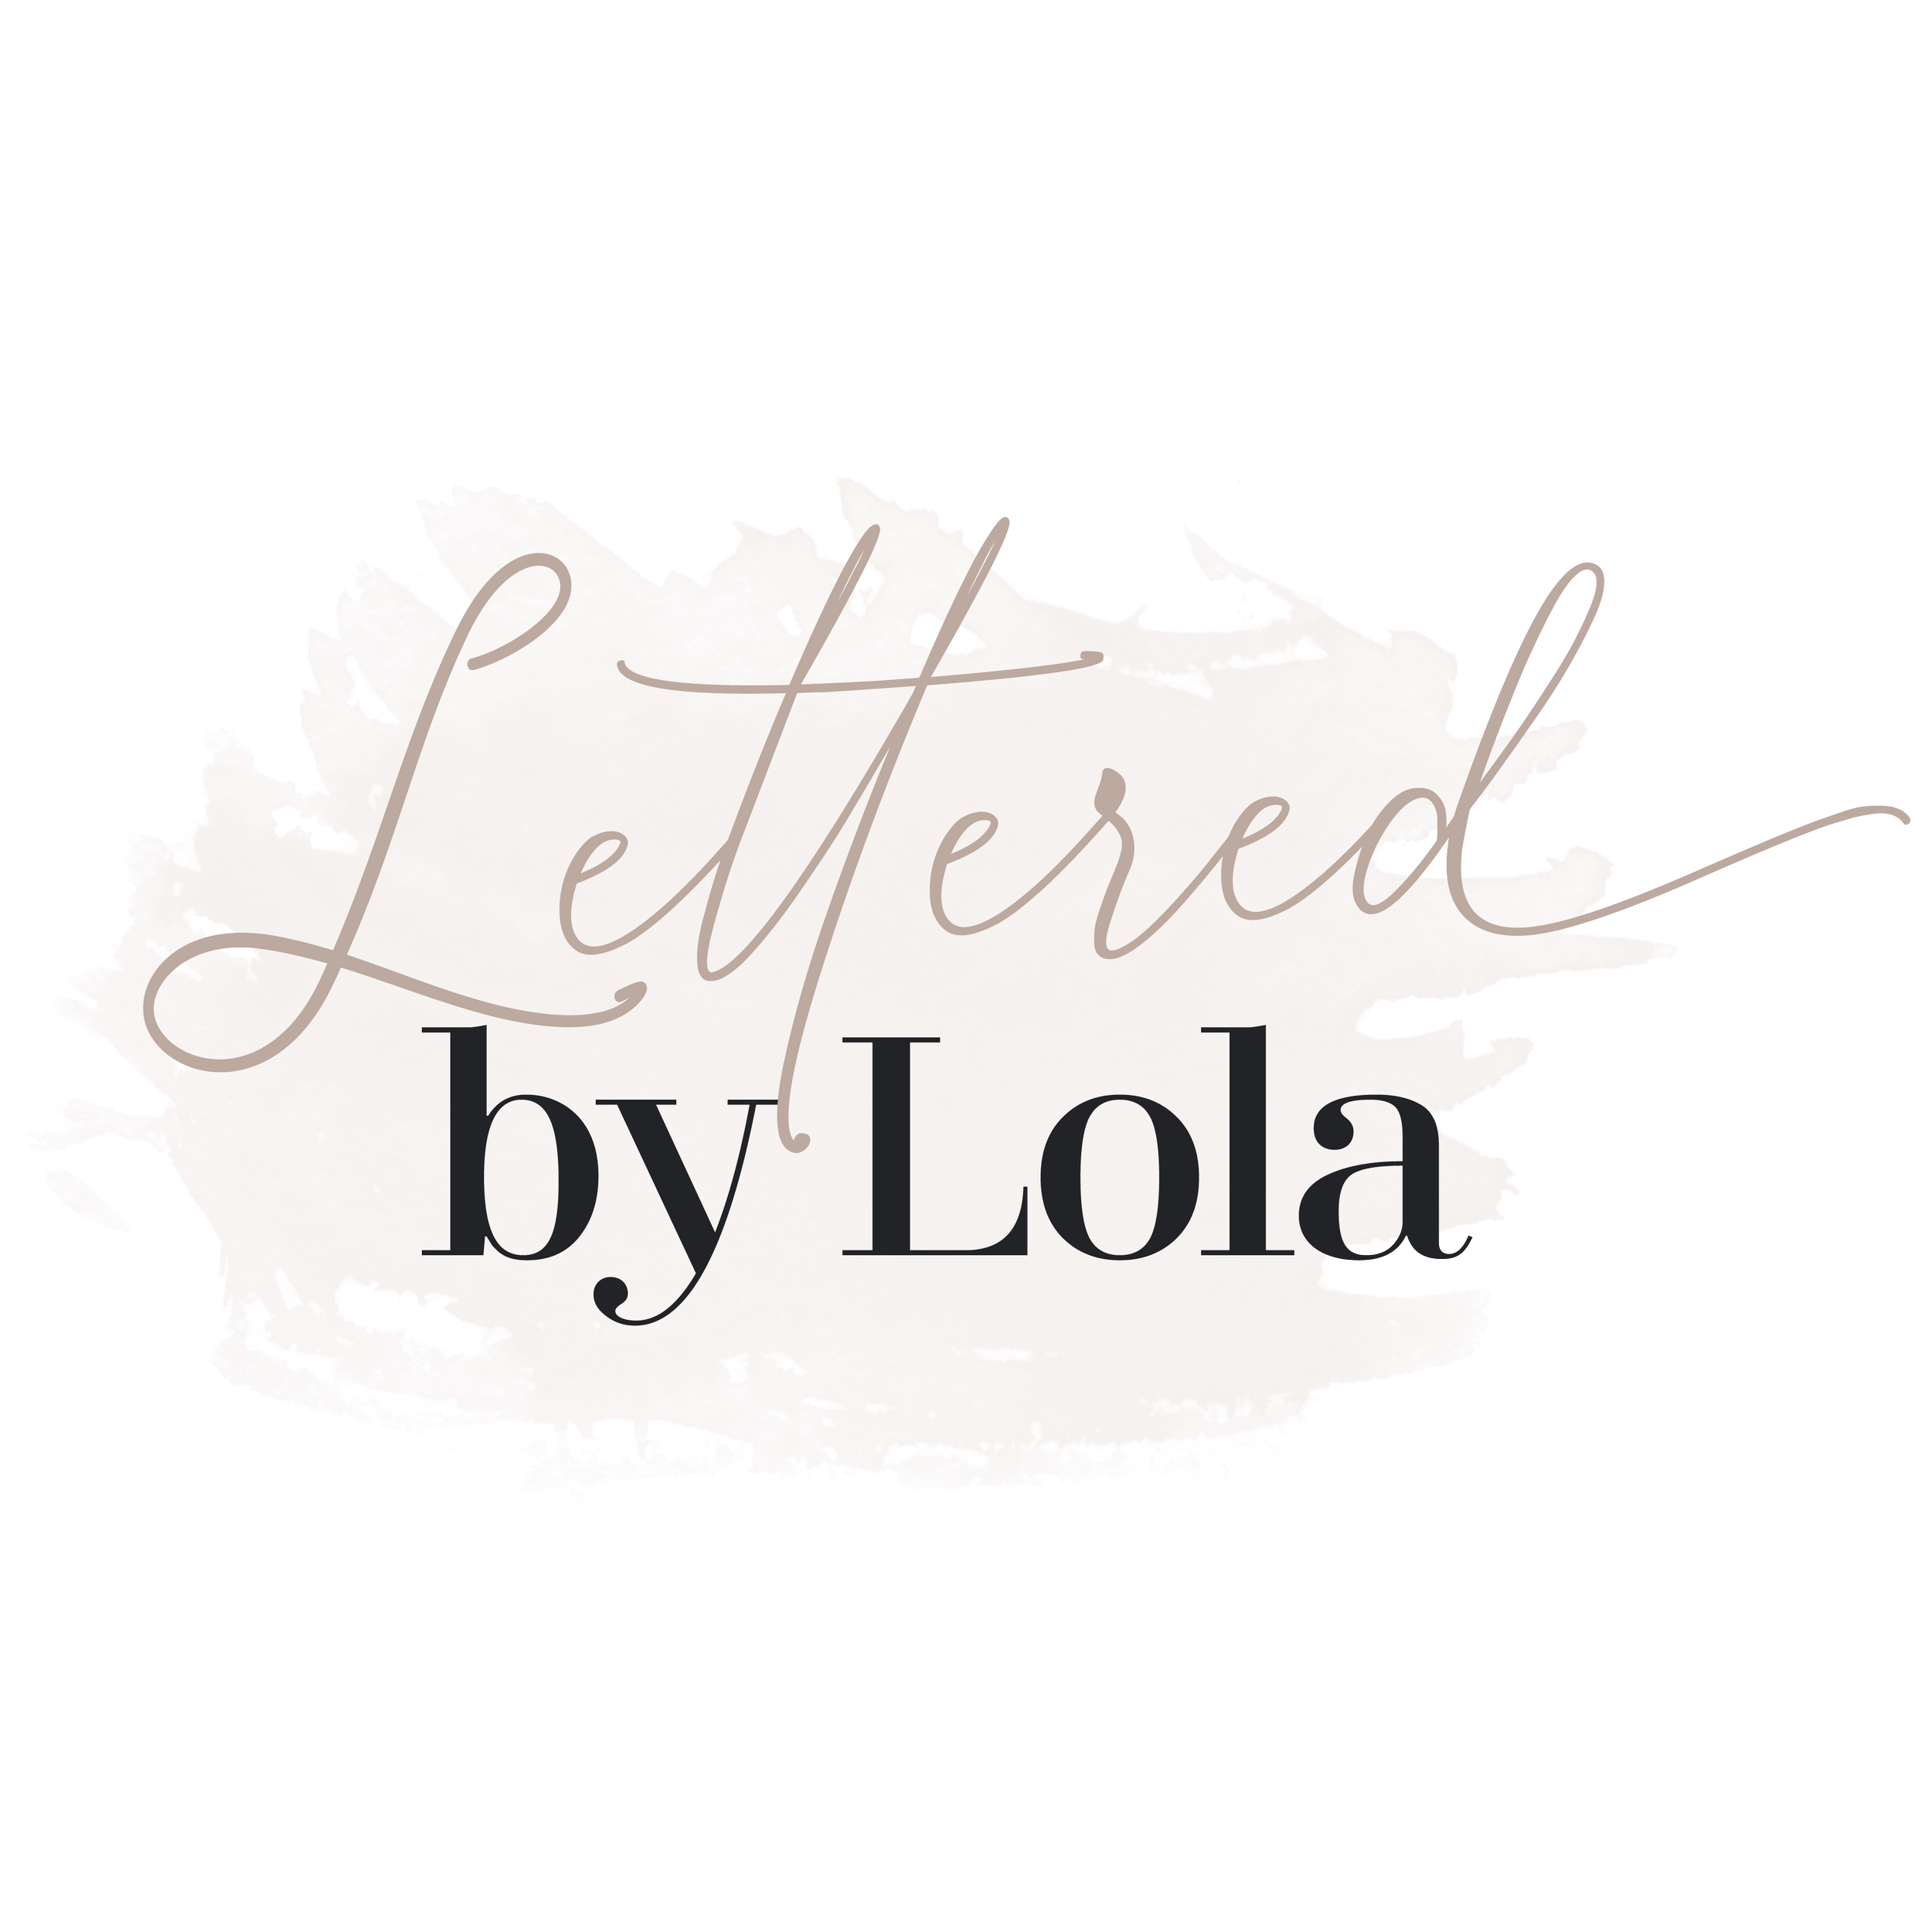 Lettered by Lola_Main Logo- Kim.png